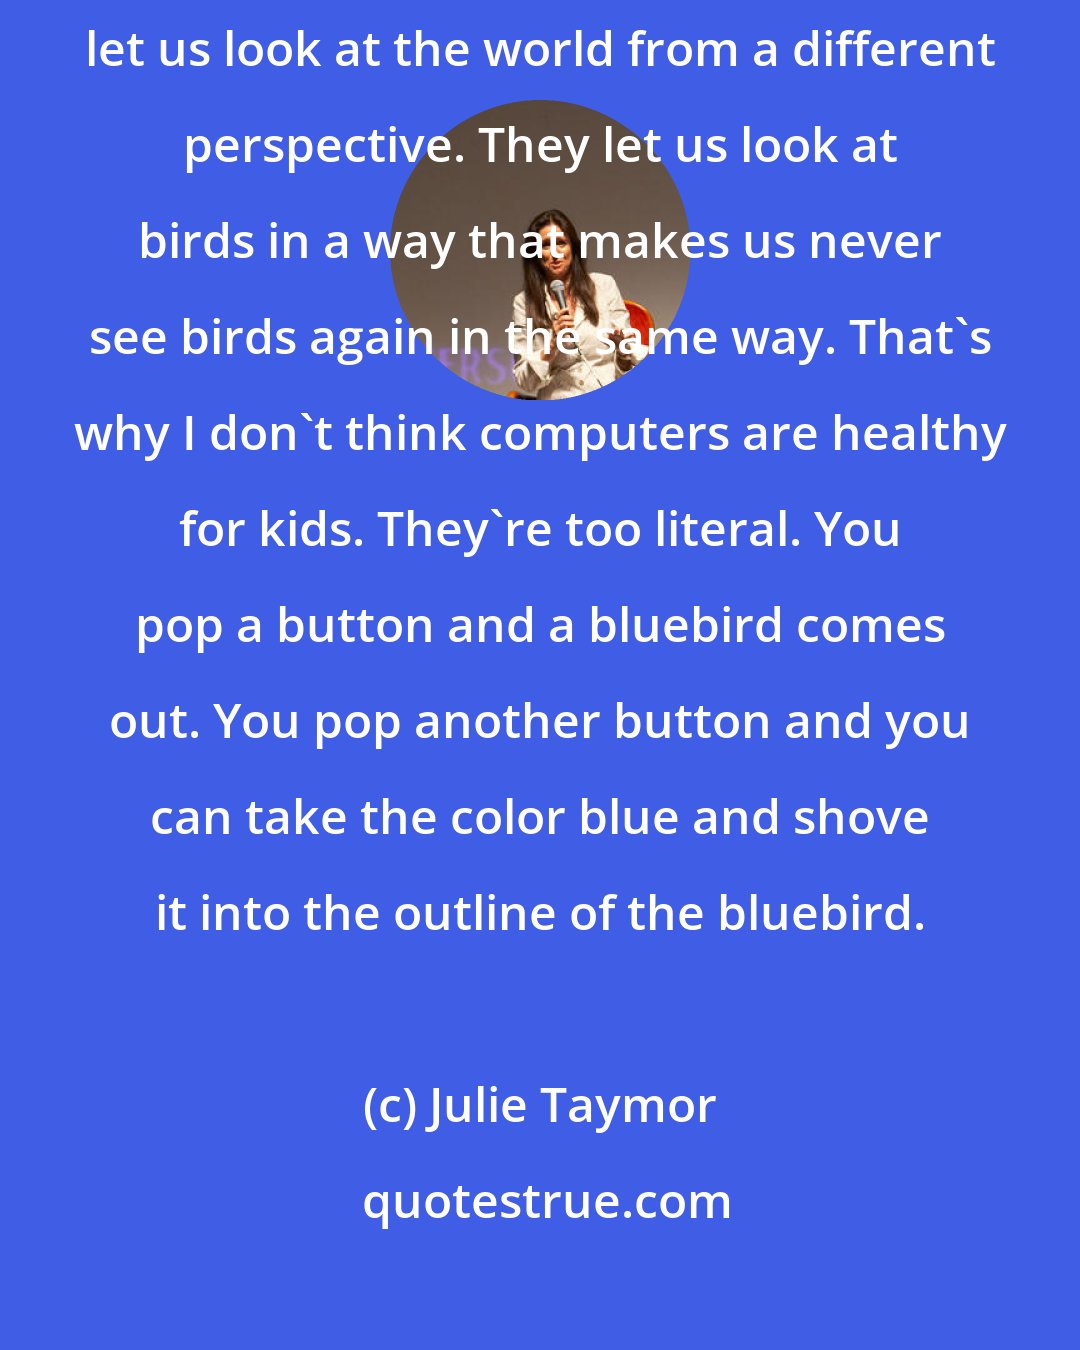 Julie Taymor: It's how you tell the story that makes it new. That's what artists do. They let us look at the world from a different perspective. They let us look at birds in a way that makes us never see birds again in the same way. That's why I don't think computers are healthy for kids. They're too literal. You pop a button and a bluebird comes out. You pop another button and you can take the color blue and shove it into the outline of the bluebird.